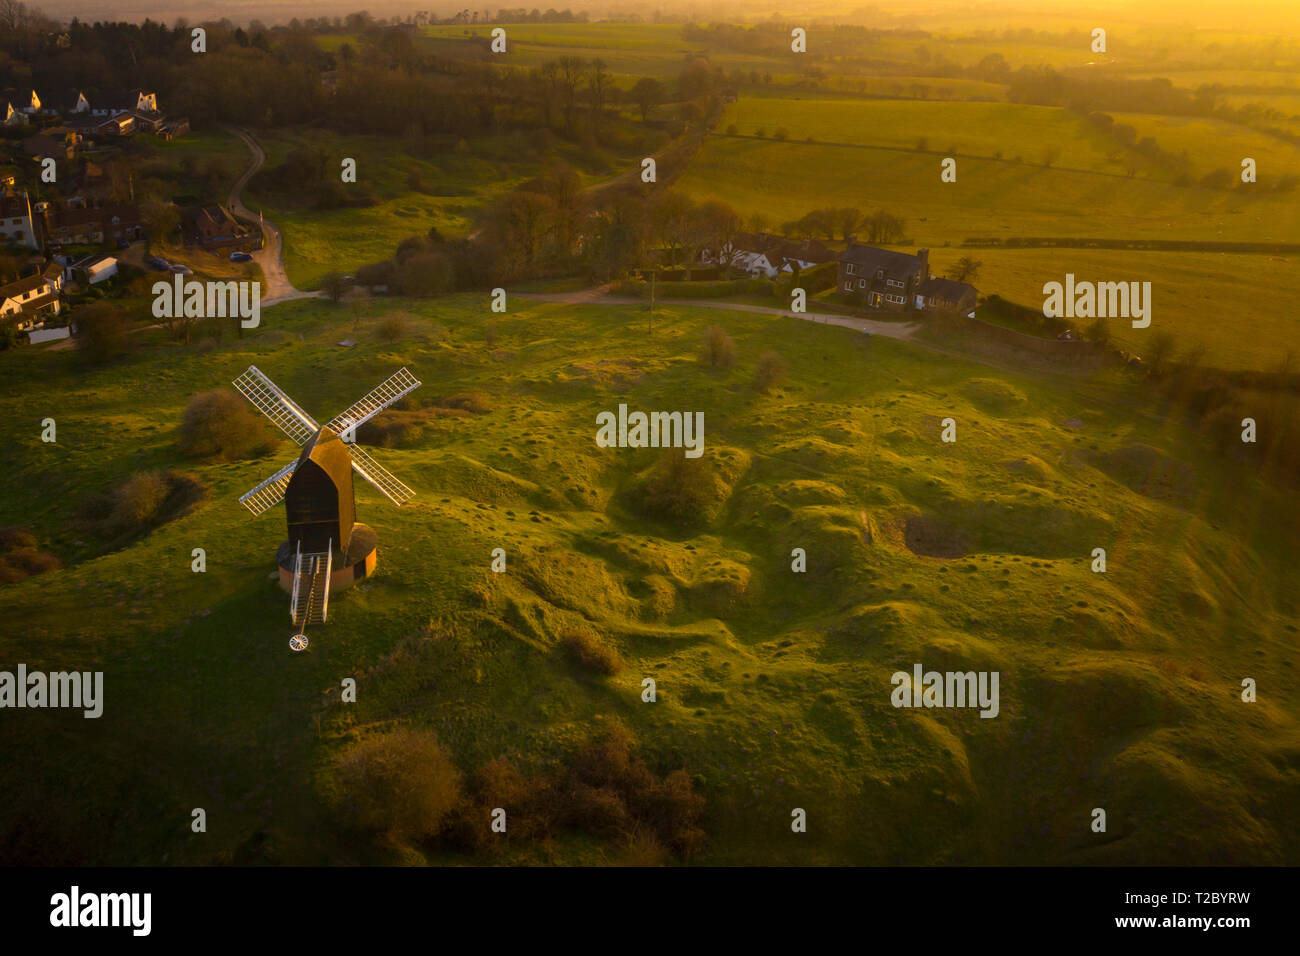 Brill Windmill at Sunset from above with a Drone,Oxfordshire ,England,UK Stock Photo